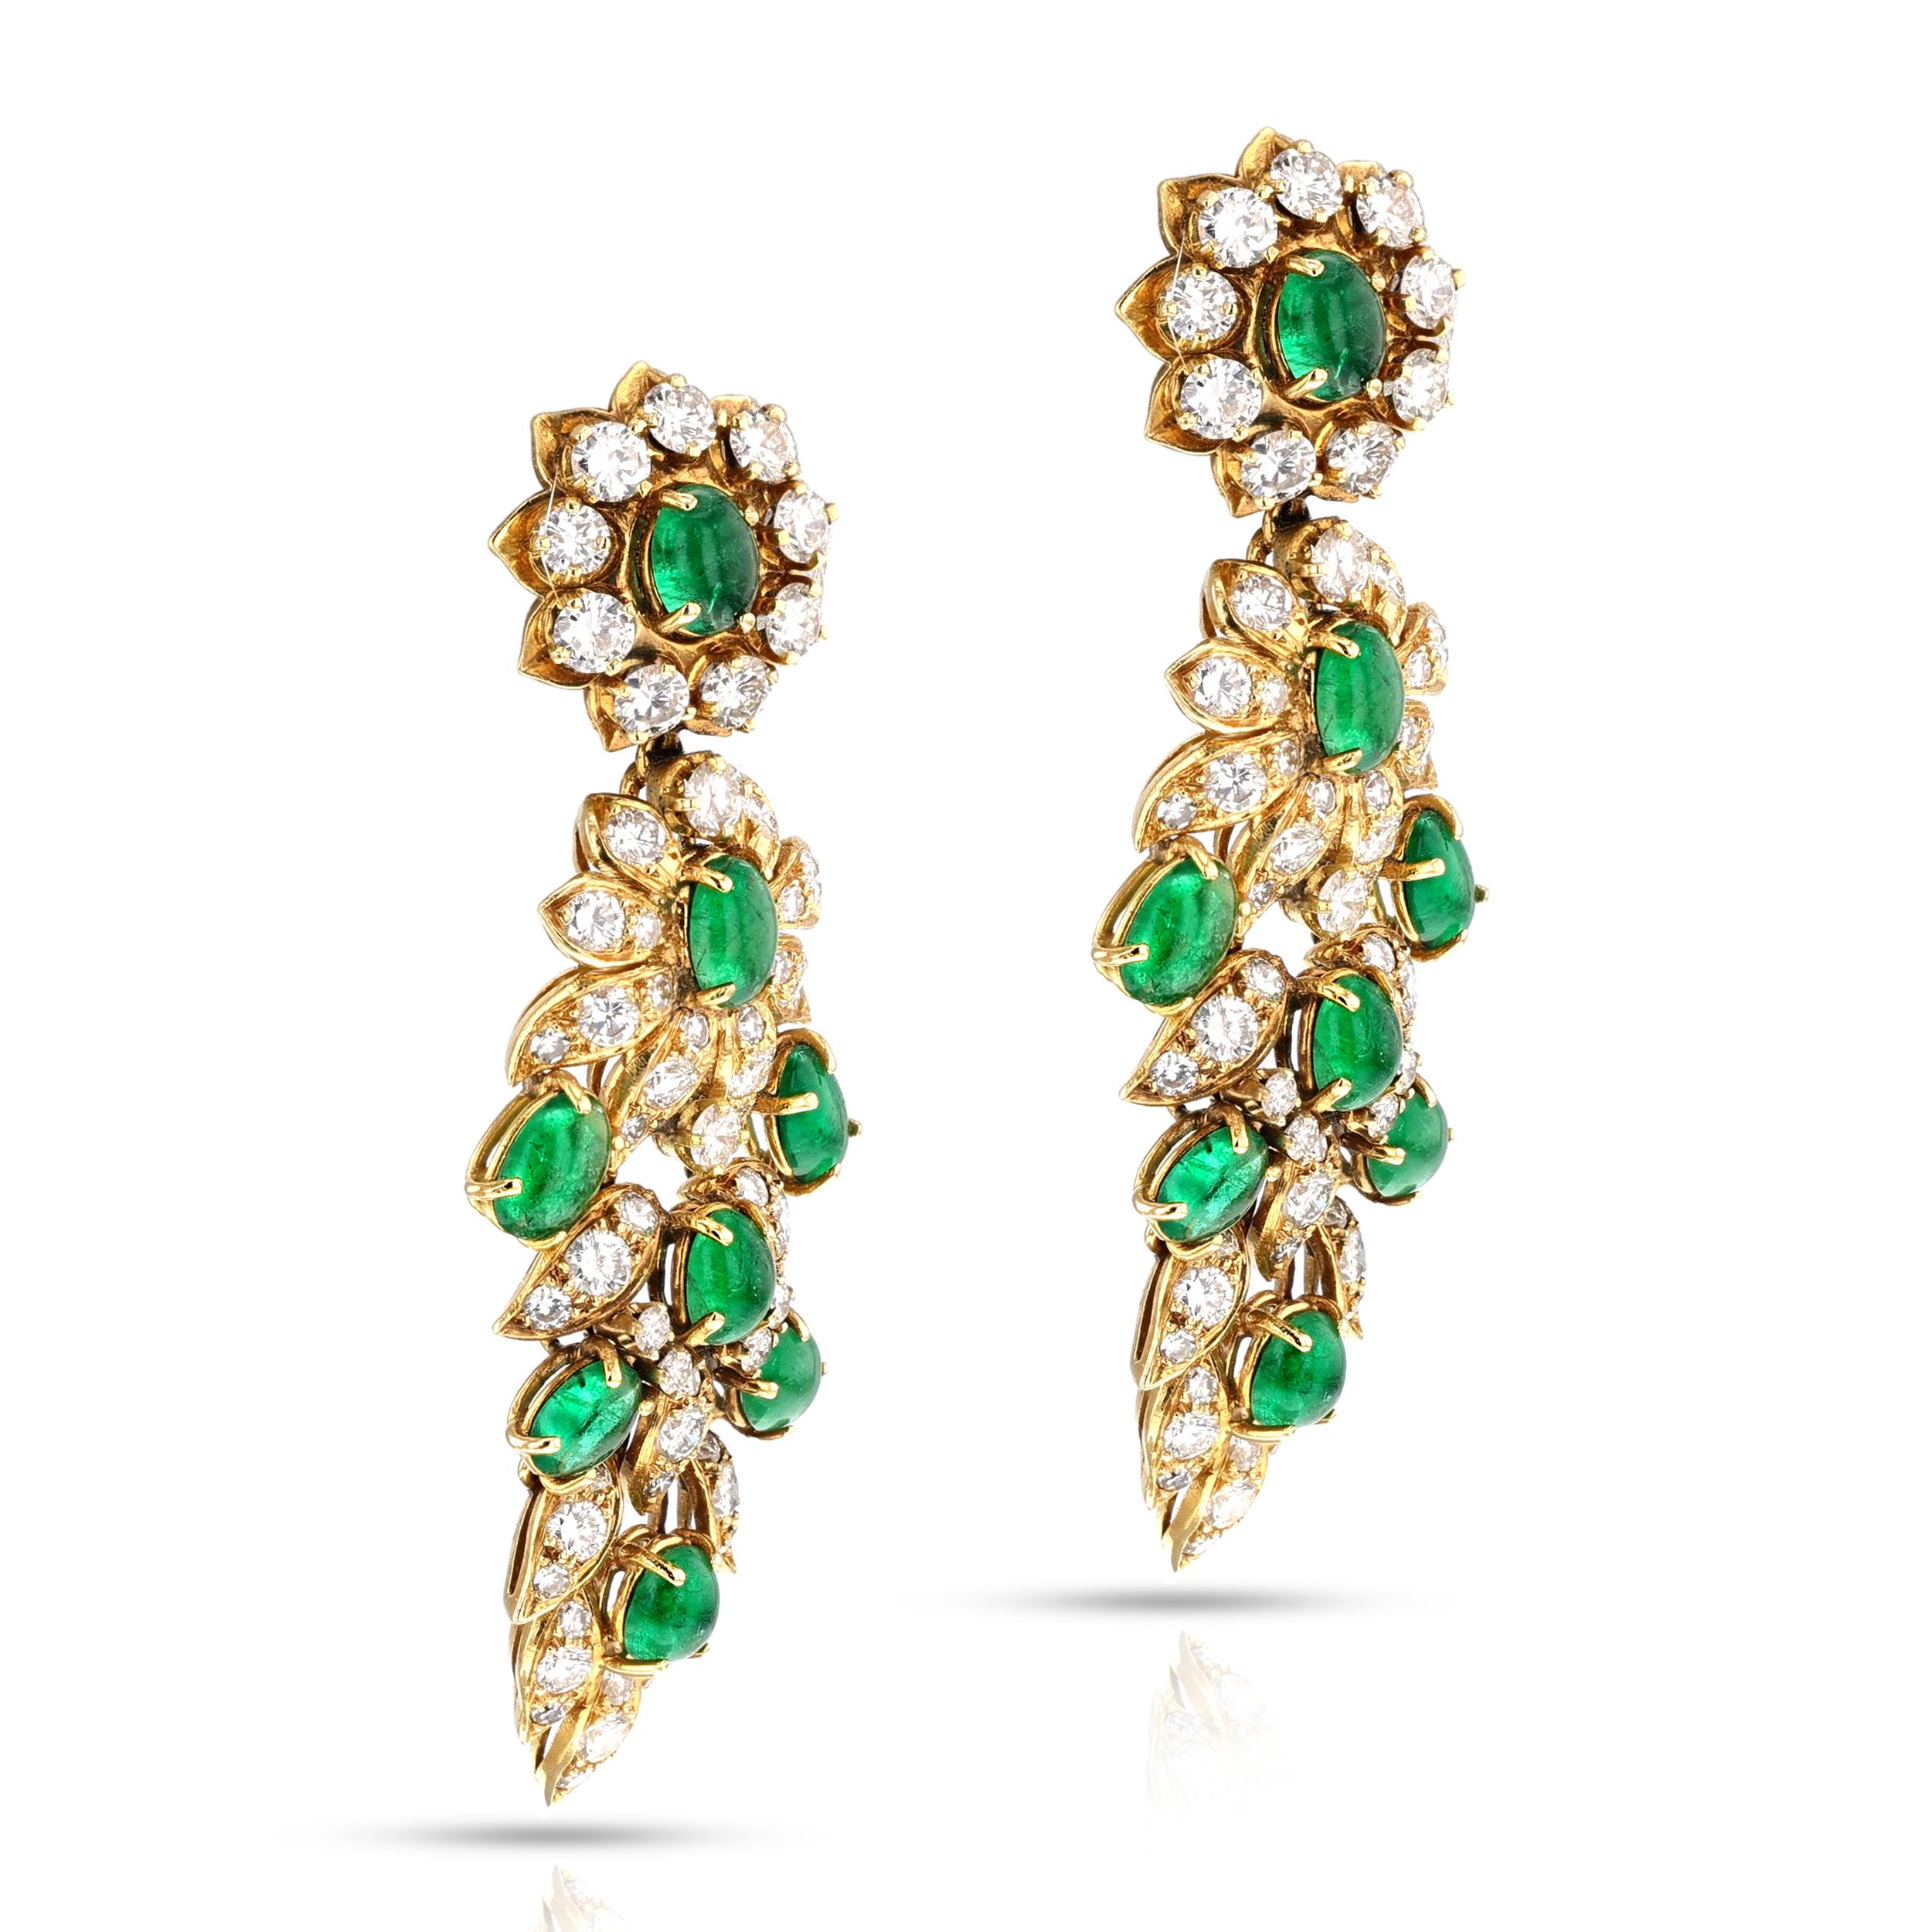 This is a beautiful and chic pair of dangle emerald and diamond earrings by Vourakis. This elegant and meticulously crafted pair of earrings is set with sixteen genuine and natural emeralds in cabochon-cut, accented with one hundred and fourteen